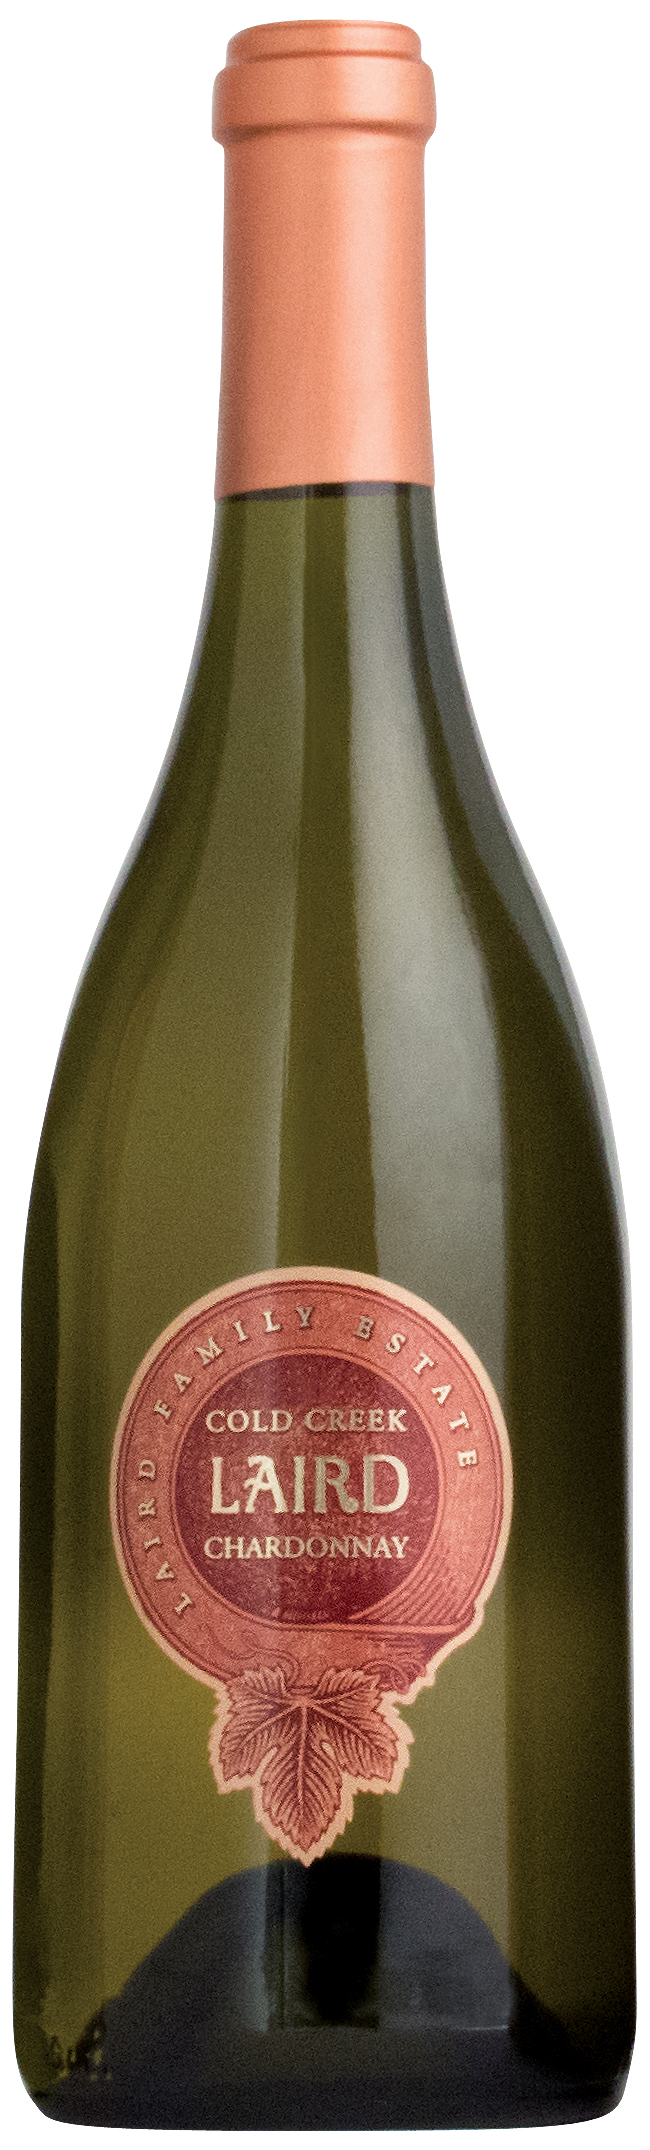 Product Image for 2019 Cold Creek Chardonnay